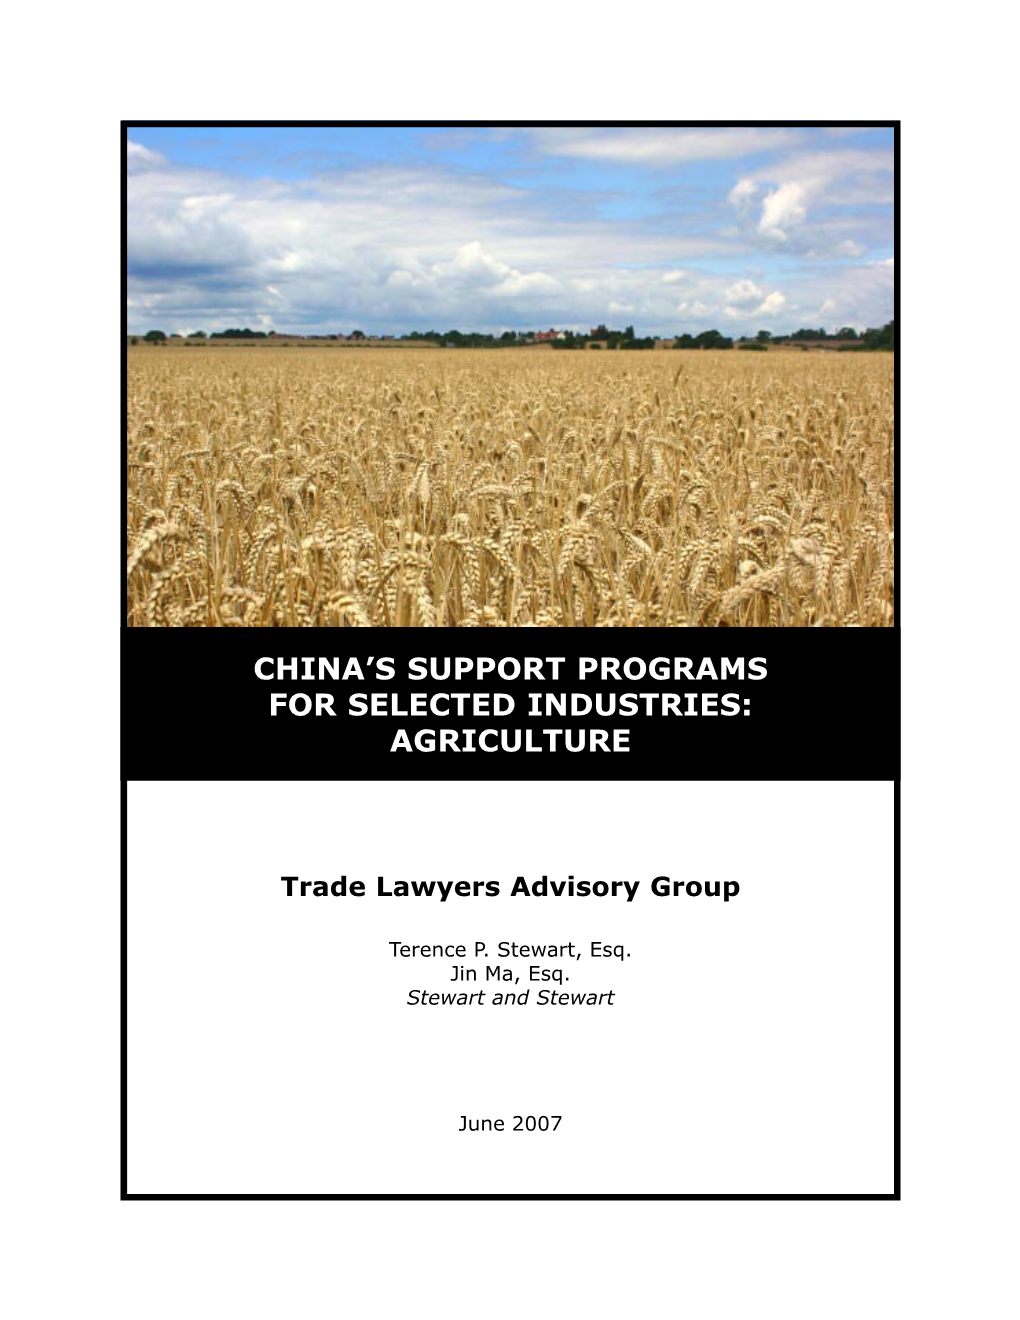 China's Support Programs for Selected Industries